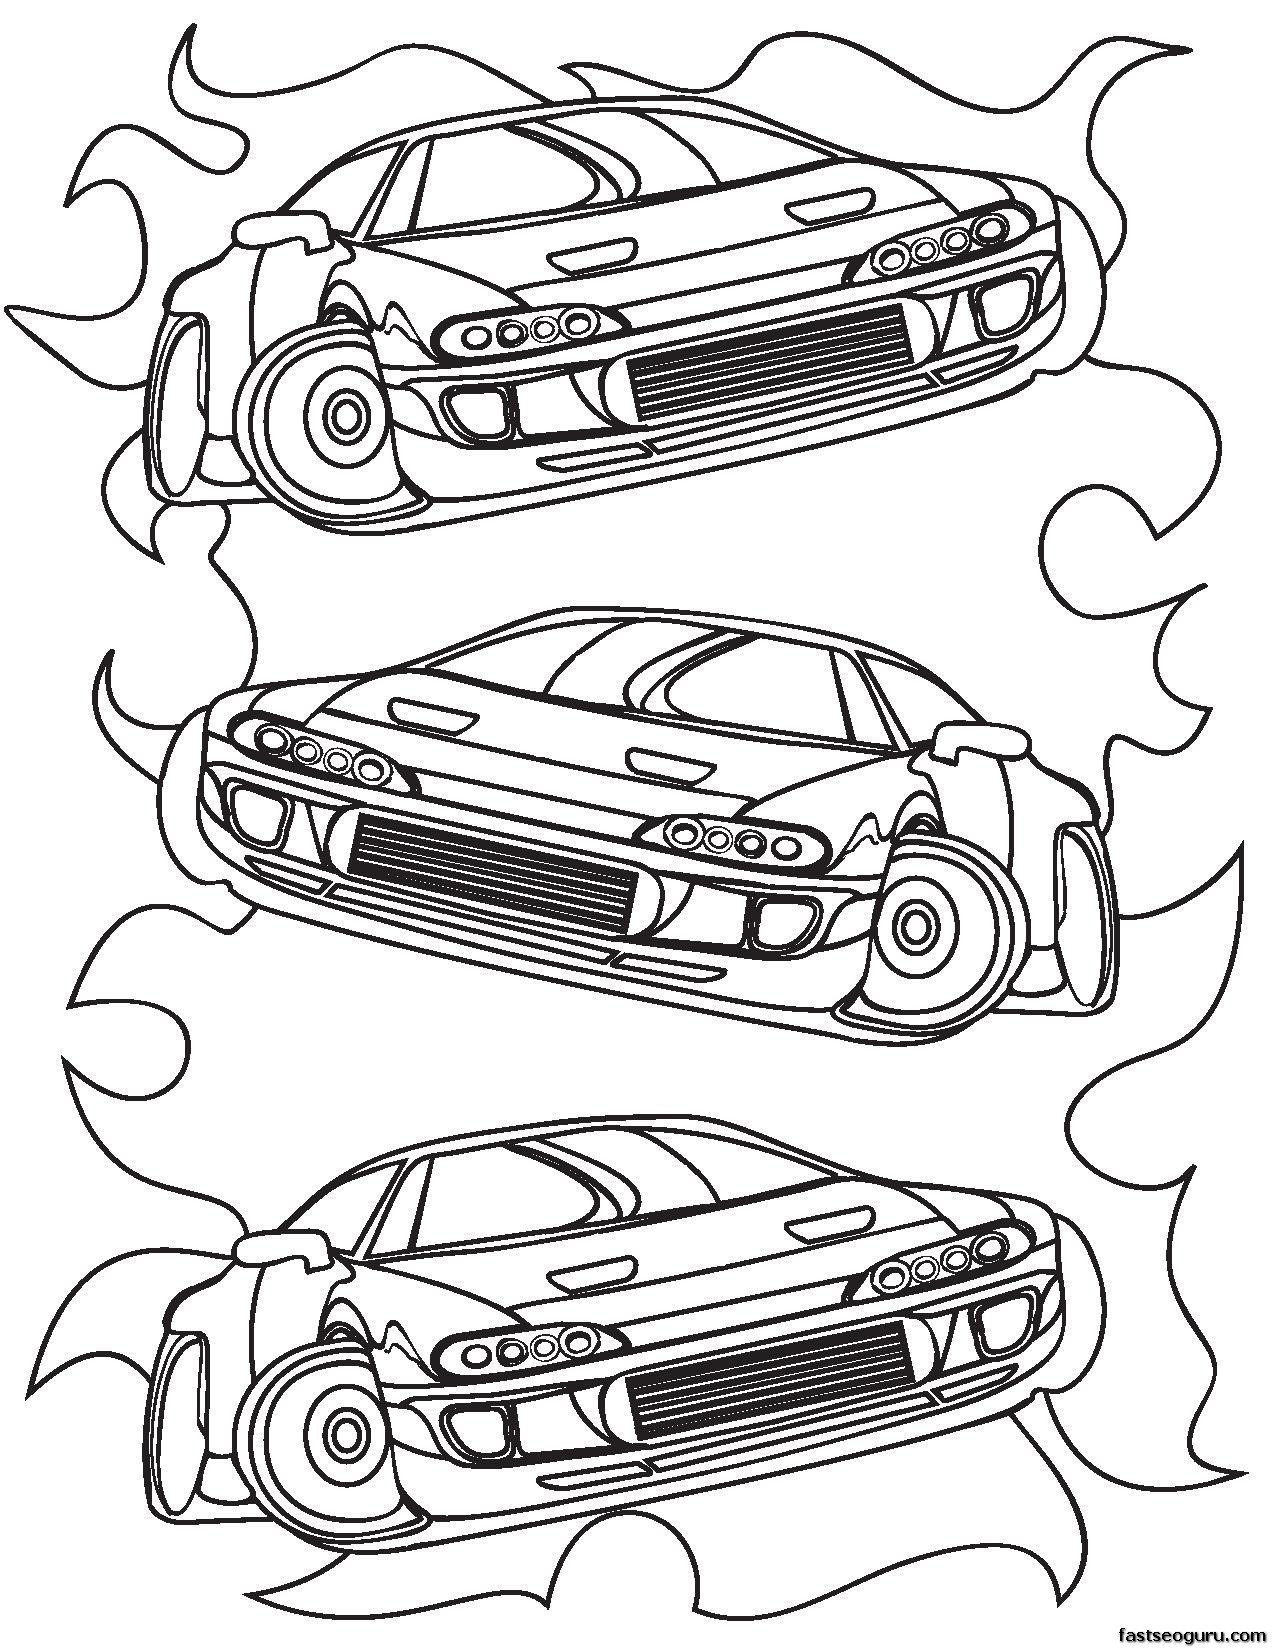 Race Care Coloring Sheets For Boys
 Printable for boy Race Car Coloring sheet Printable